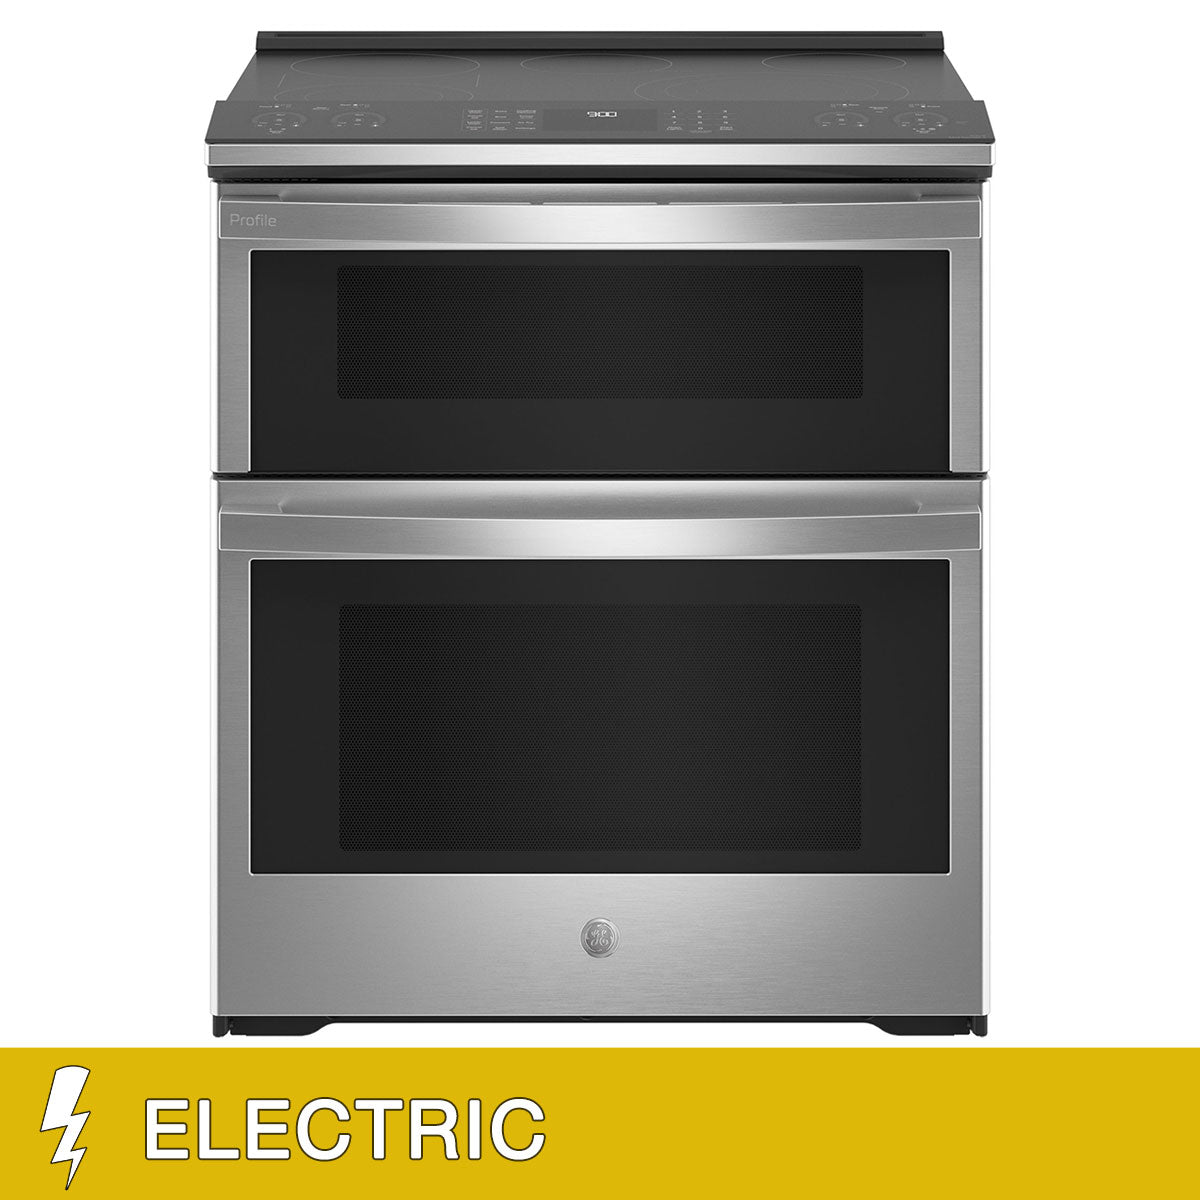 GE Profile 30 Inch. 6.6 cu. ft. ELECTRIC Smart Slide-In Convection Double Oven in Fingerprint Resistant Stainless Steel Image